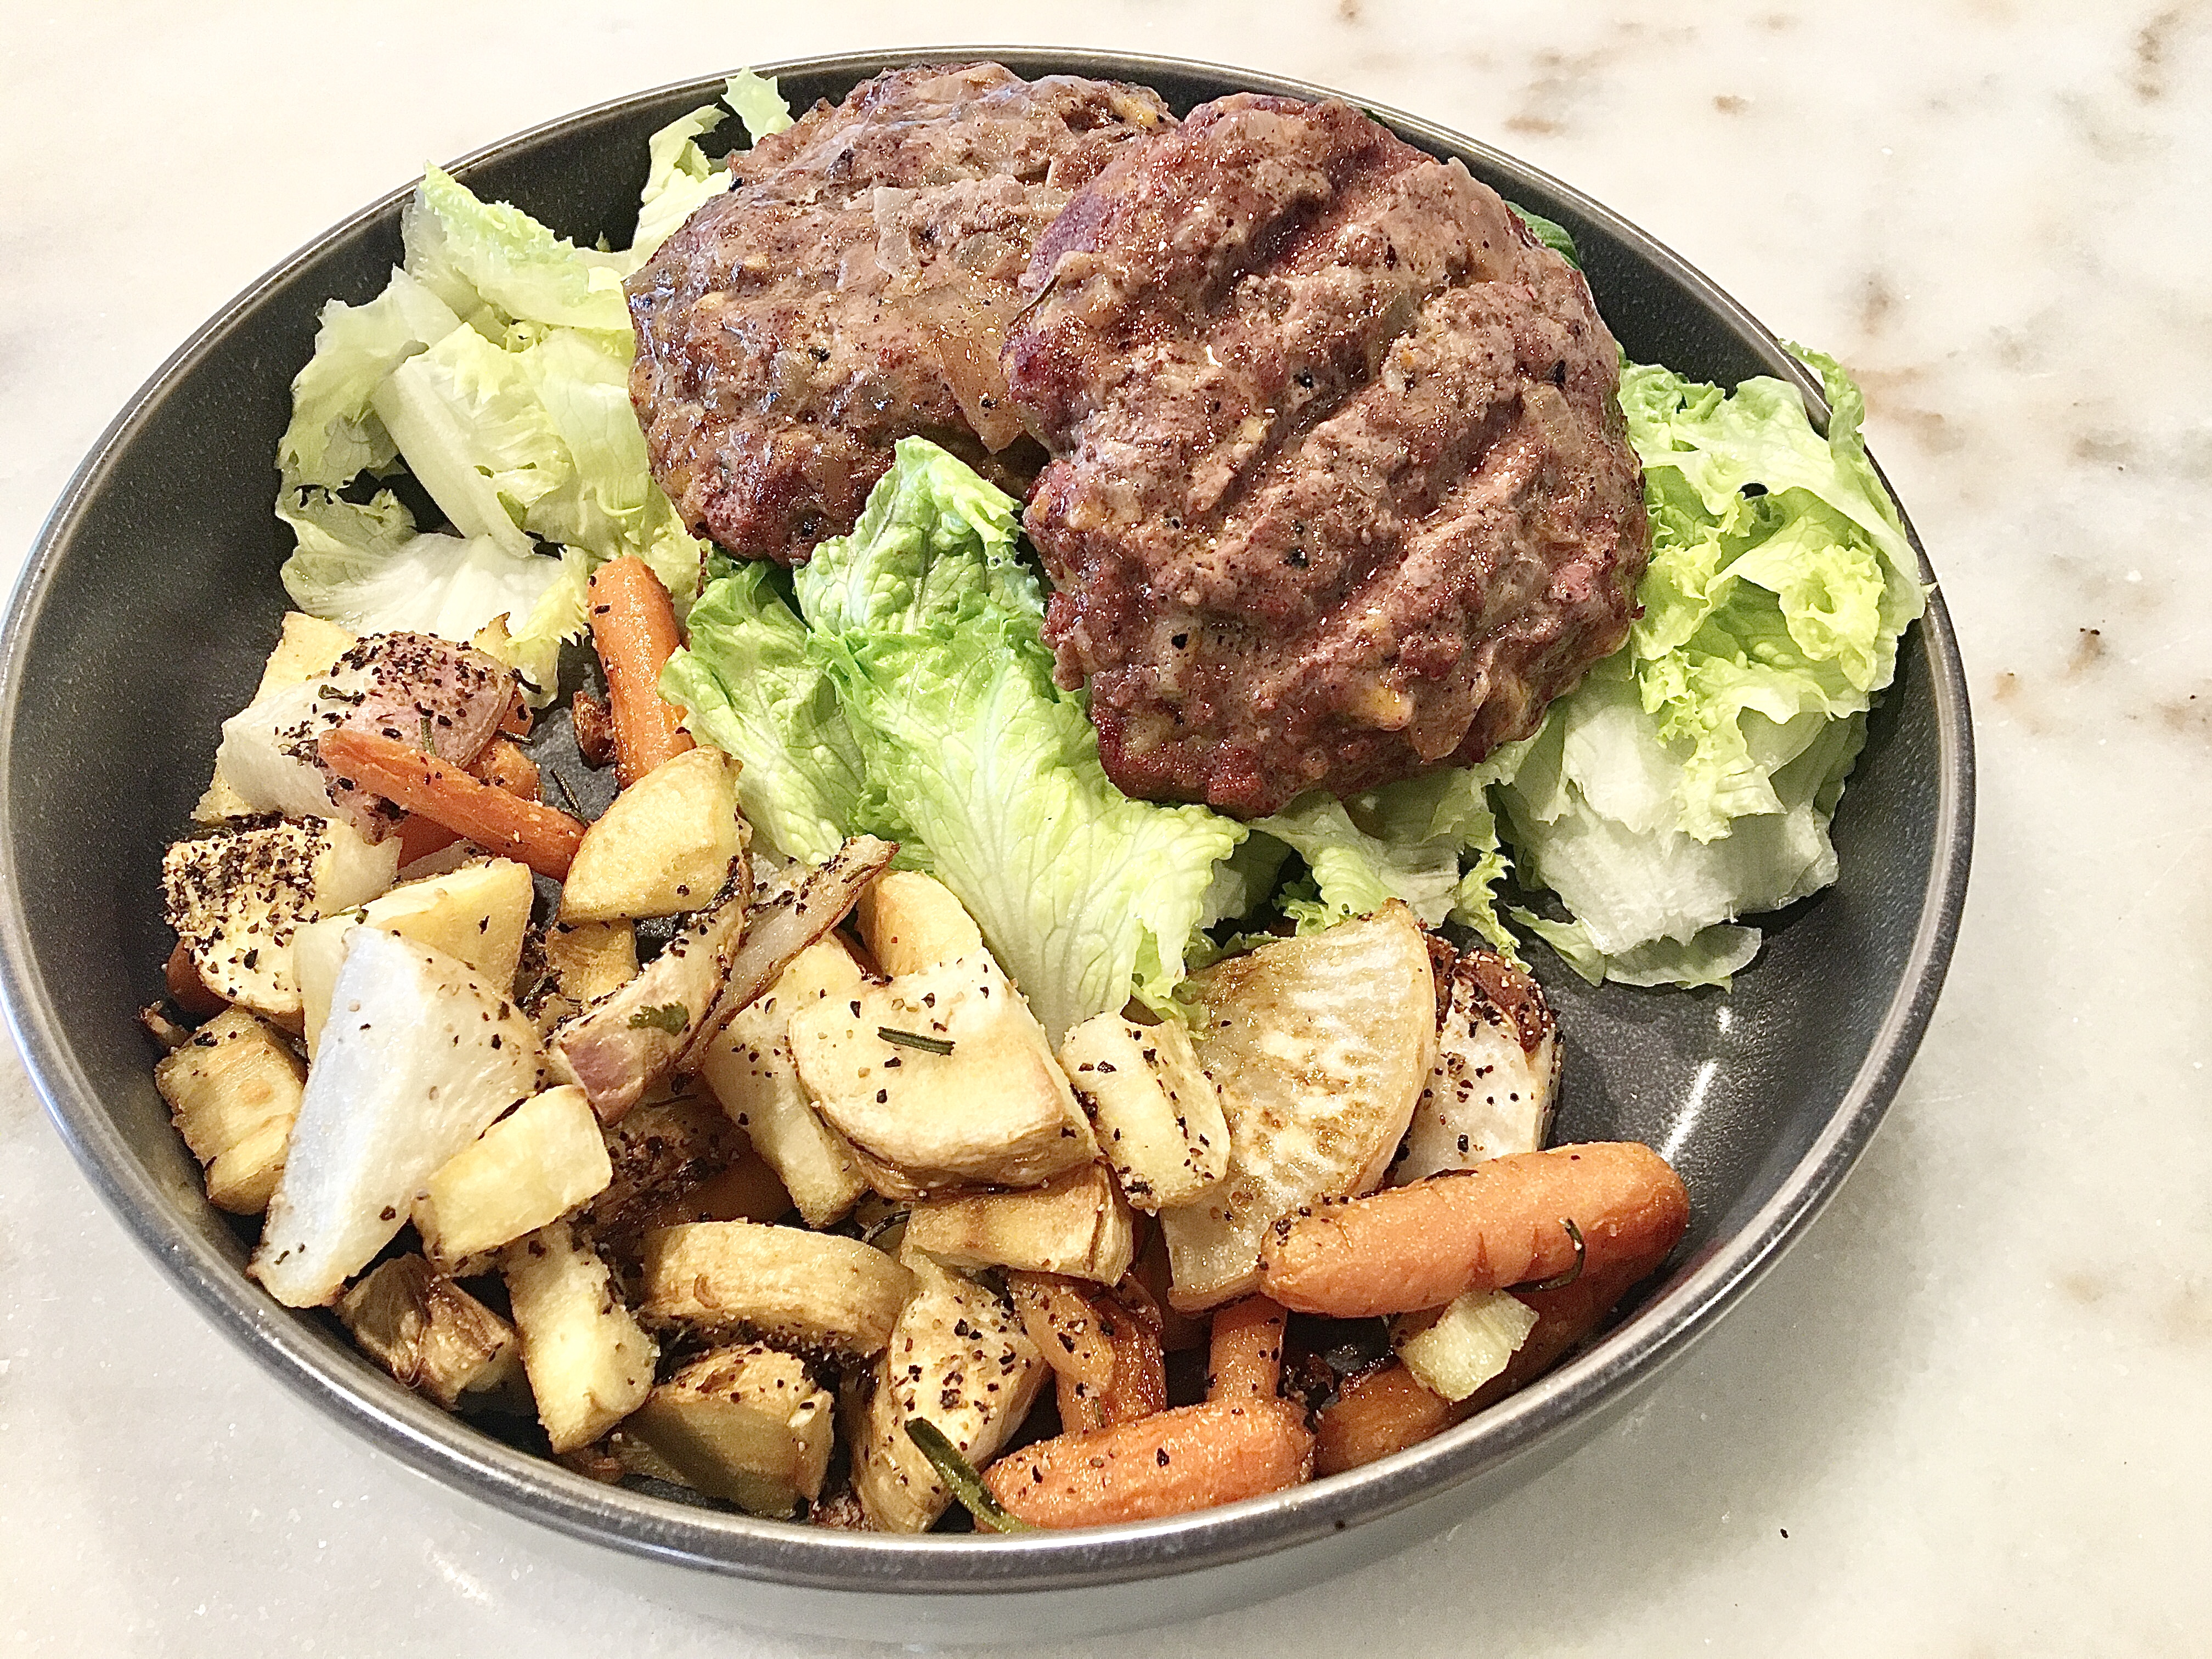 winter root vegetables full of parsnips, turnips, and carrots with a juicy hamburger on a bed of lettuce keto style